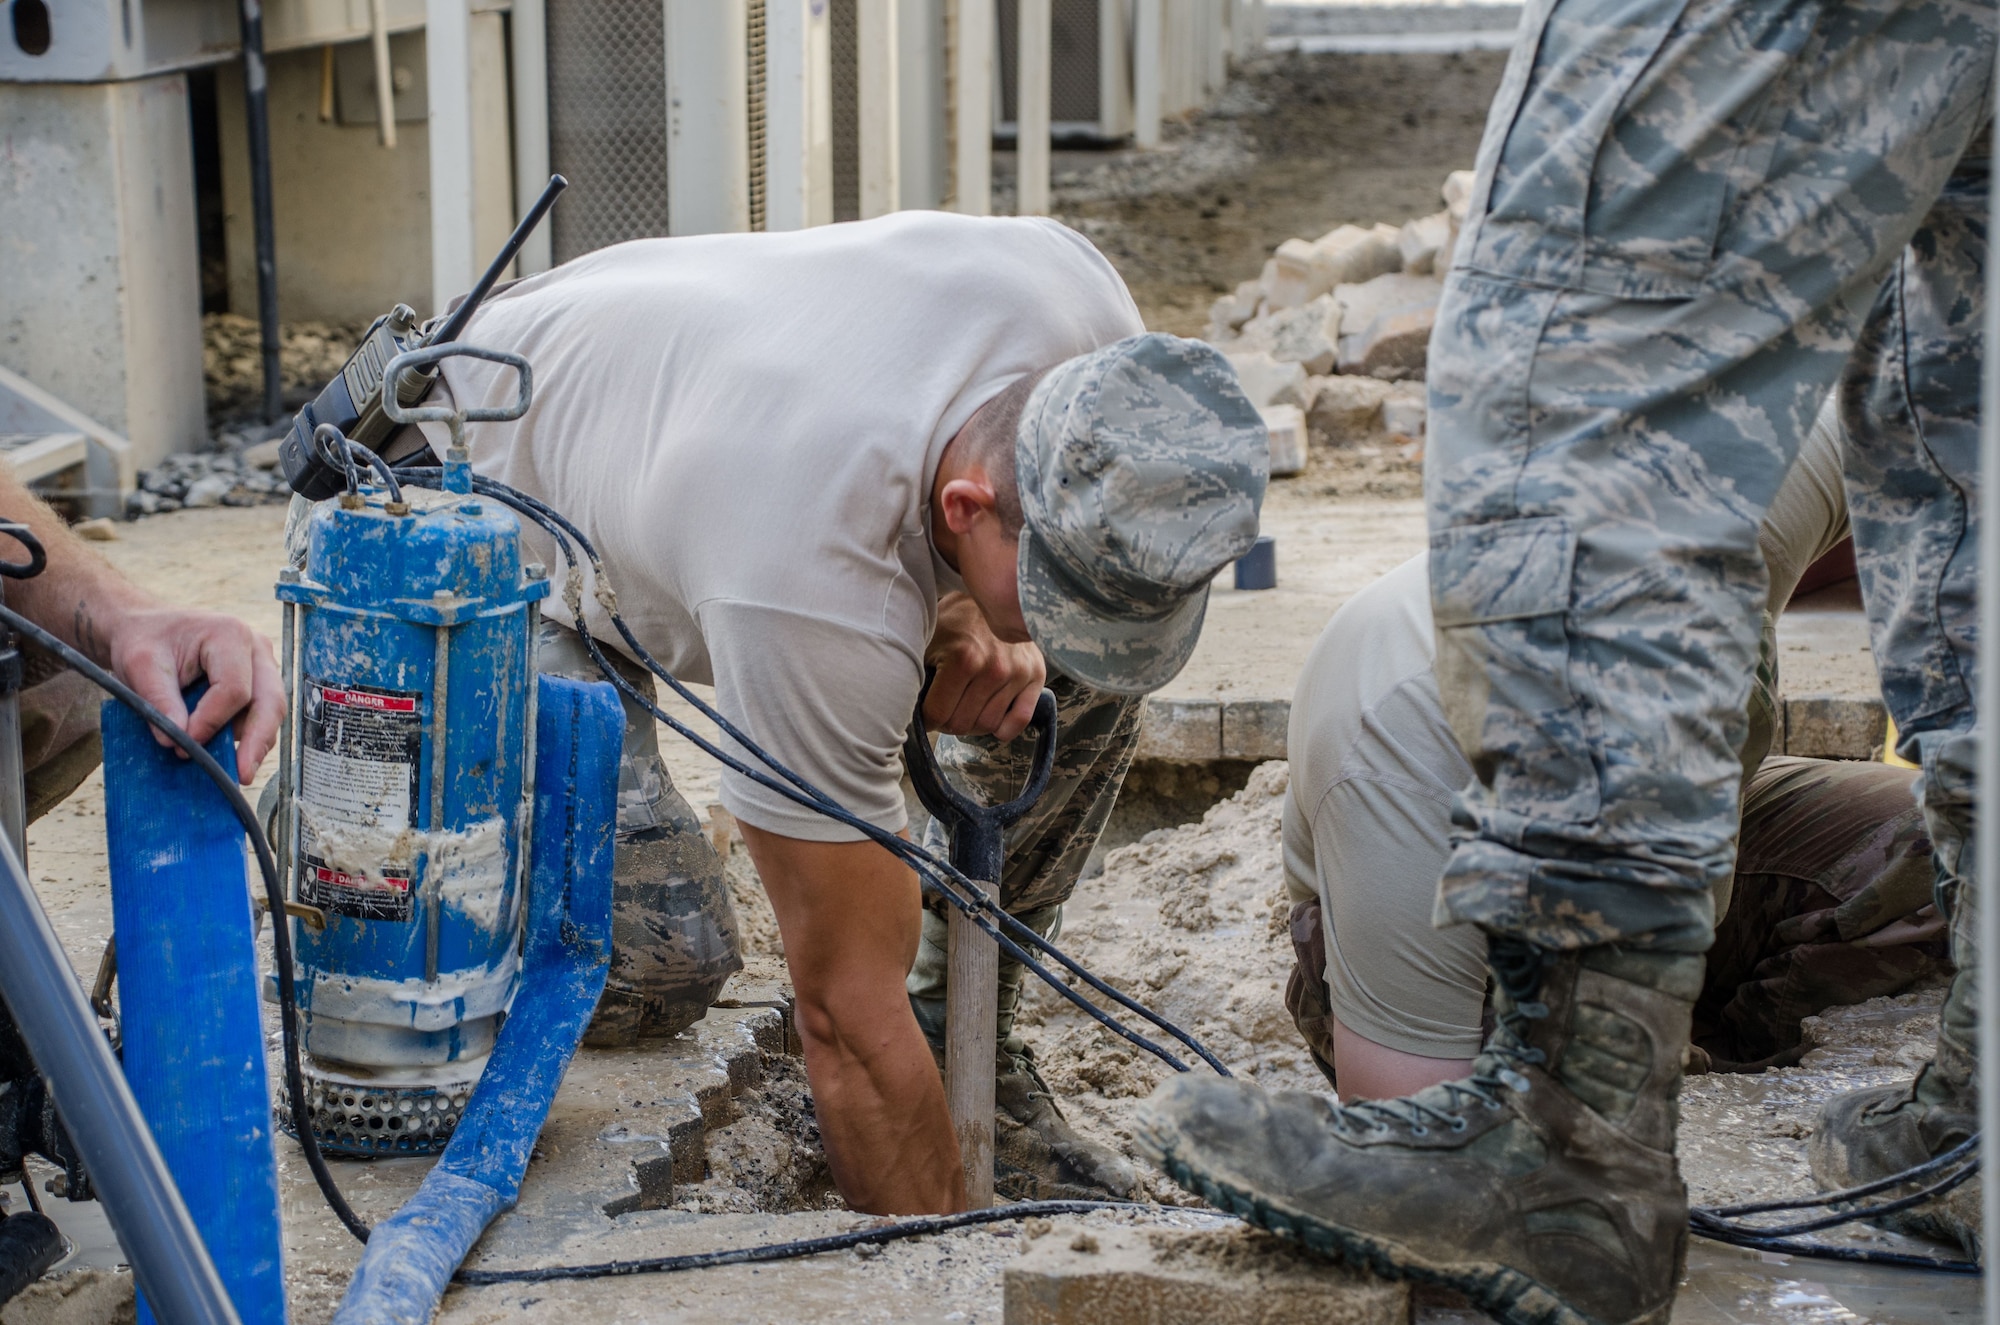 Senior Airman Malachi Nemitz, 380th Expeditionary Civil Engineering Squadron, water and fuels system specialist, shovels out dirt to find a damaged water line at Al Dhafra Air Base, United Arab Emirates Jan. 11, 2017. (U.S. Air National Guard photo by Staff Sgt. Colton Elliott)